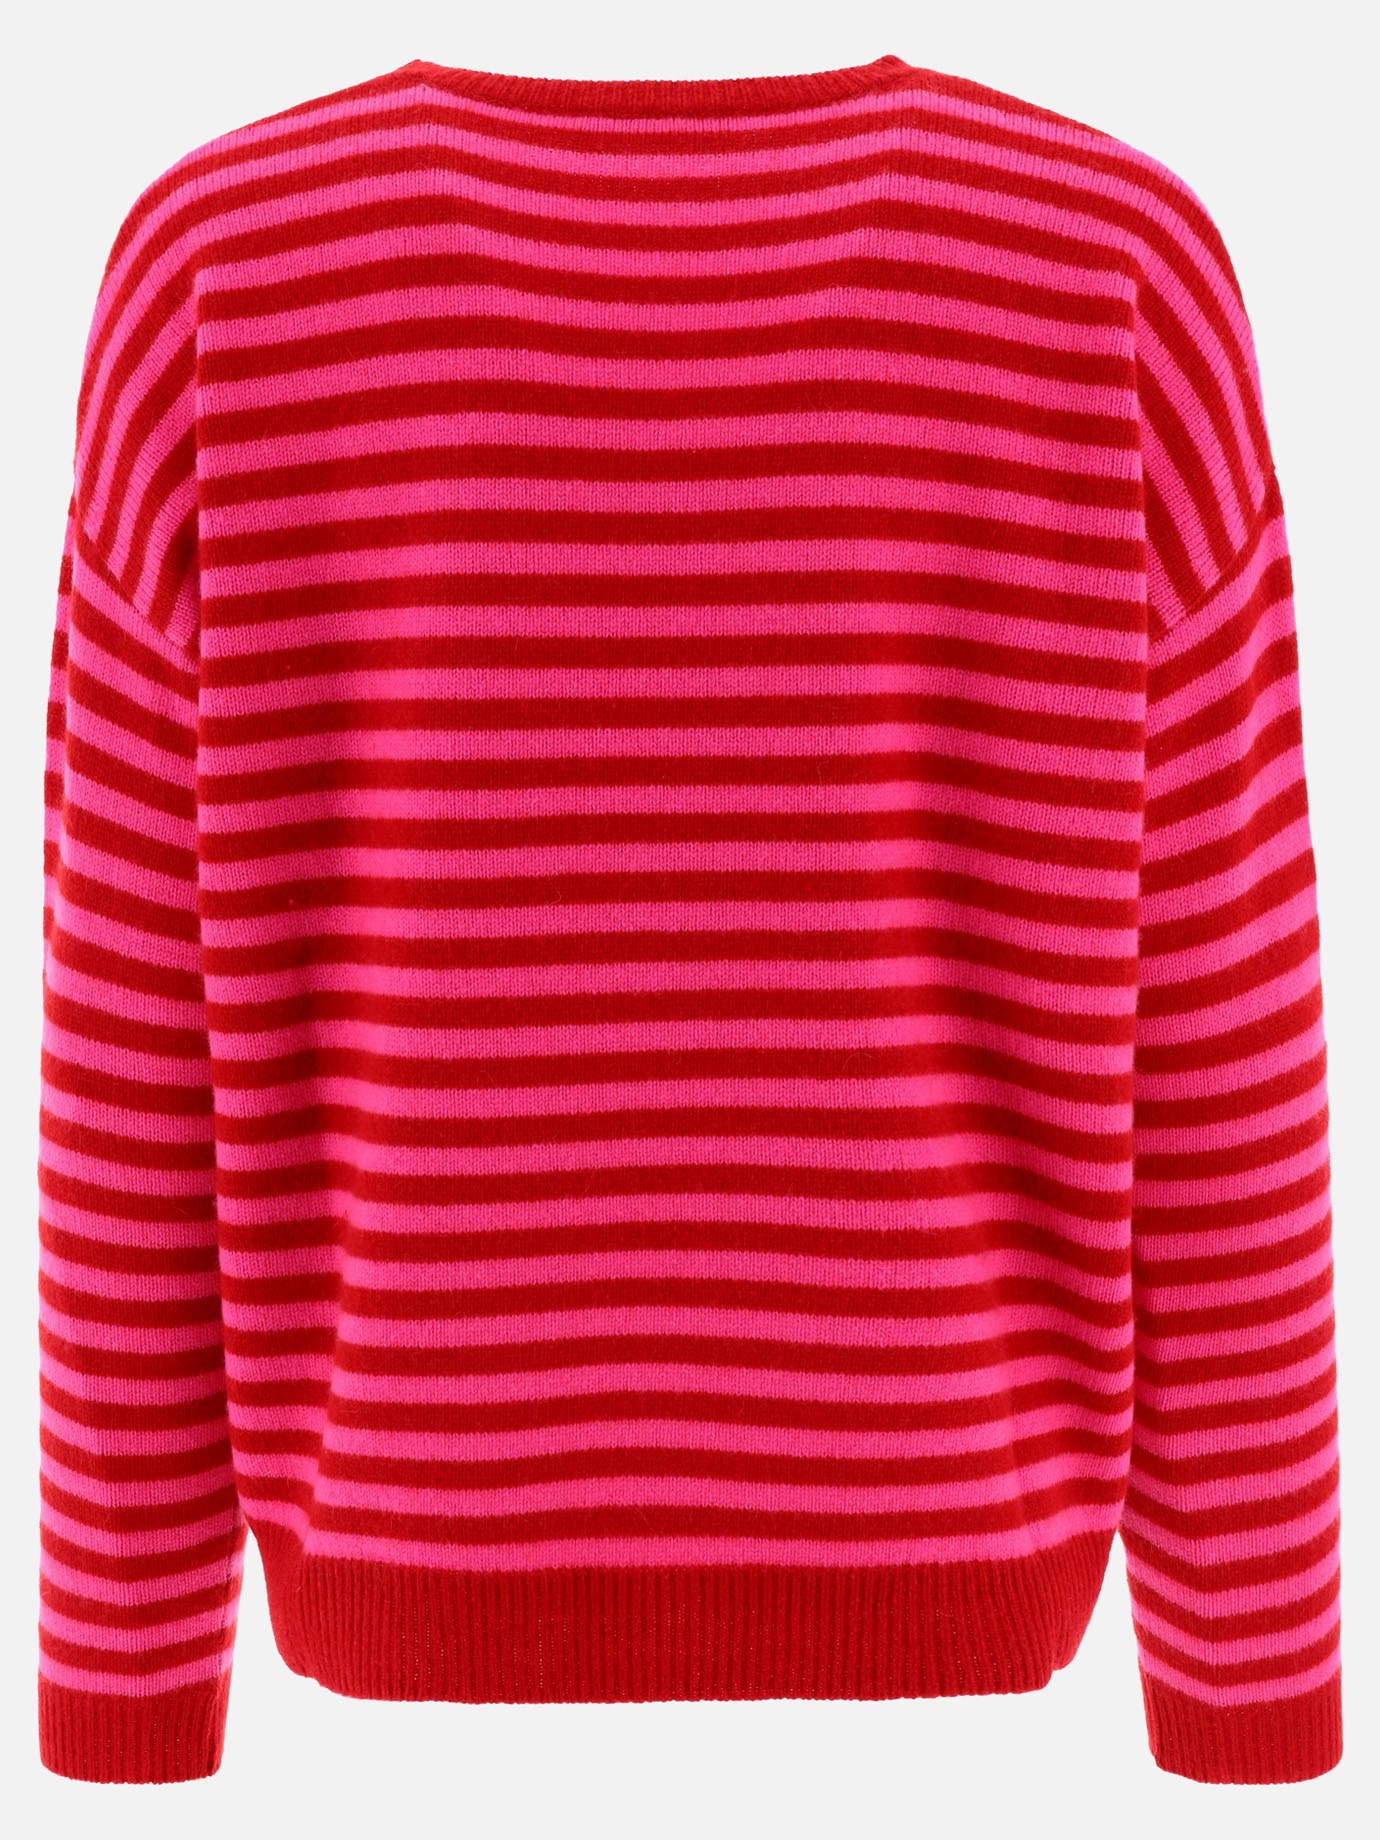  Aster  striped sweater by Max Mara